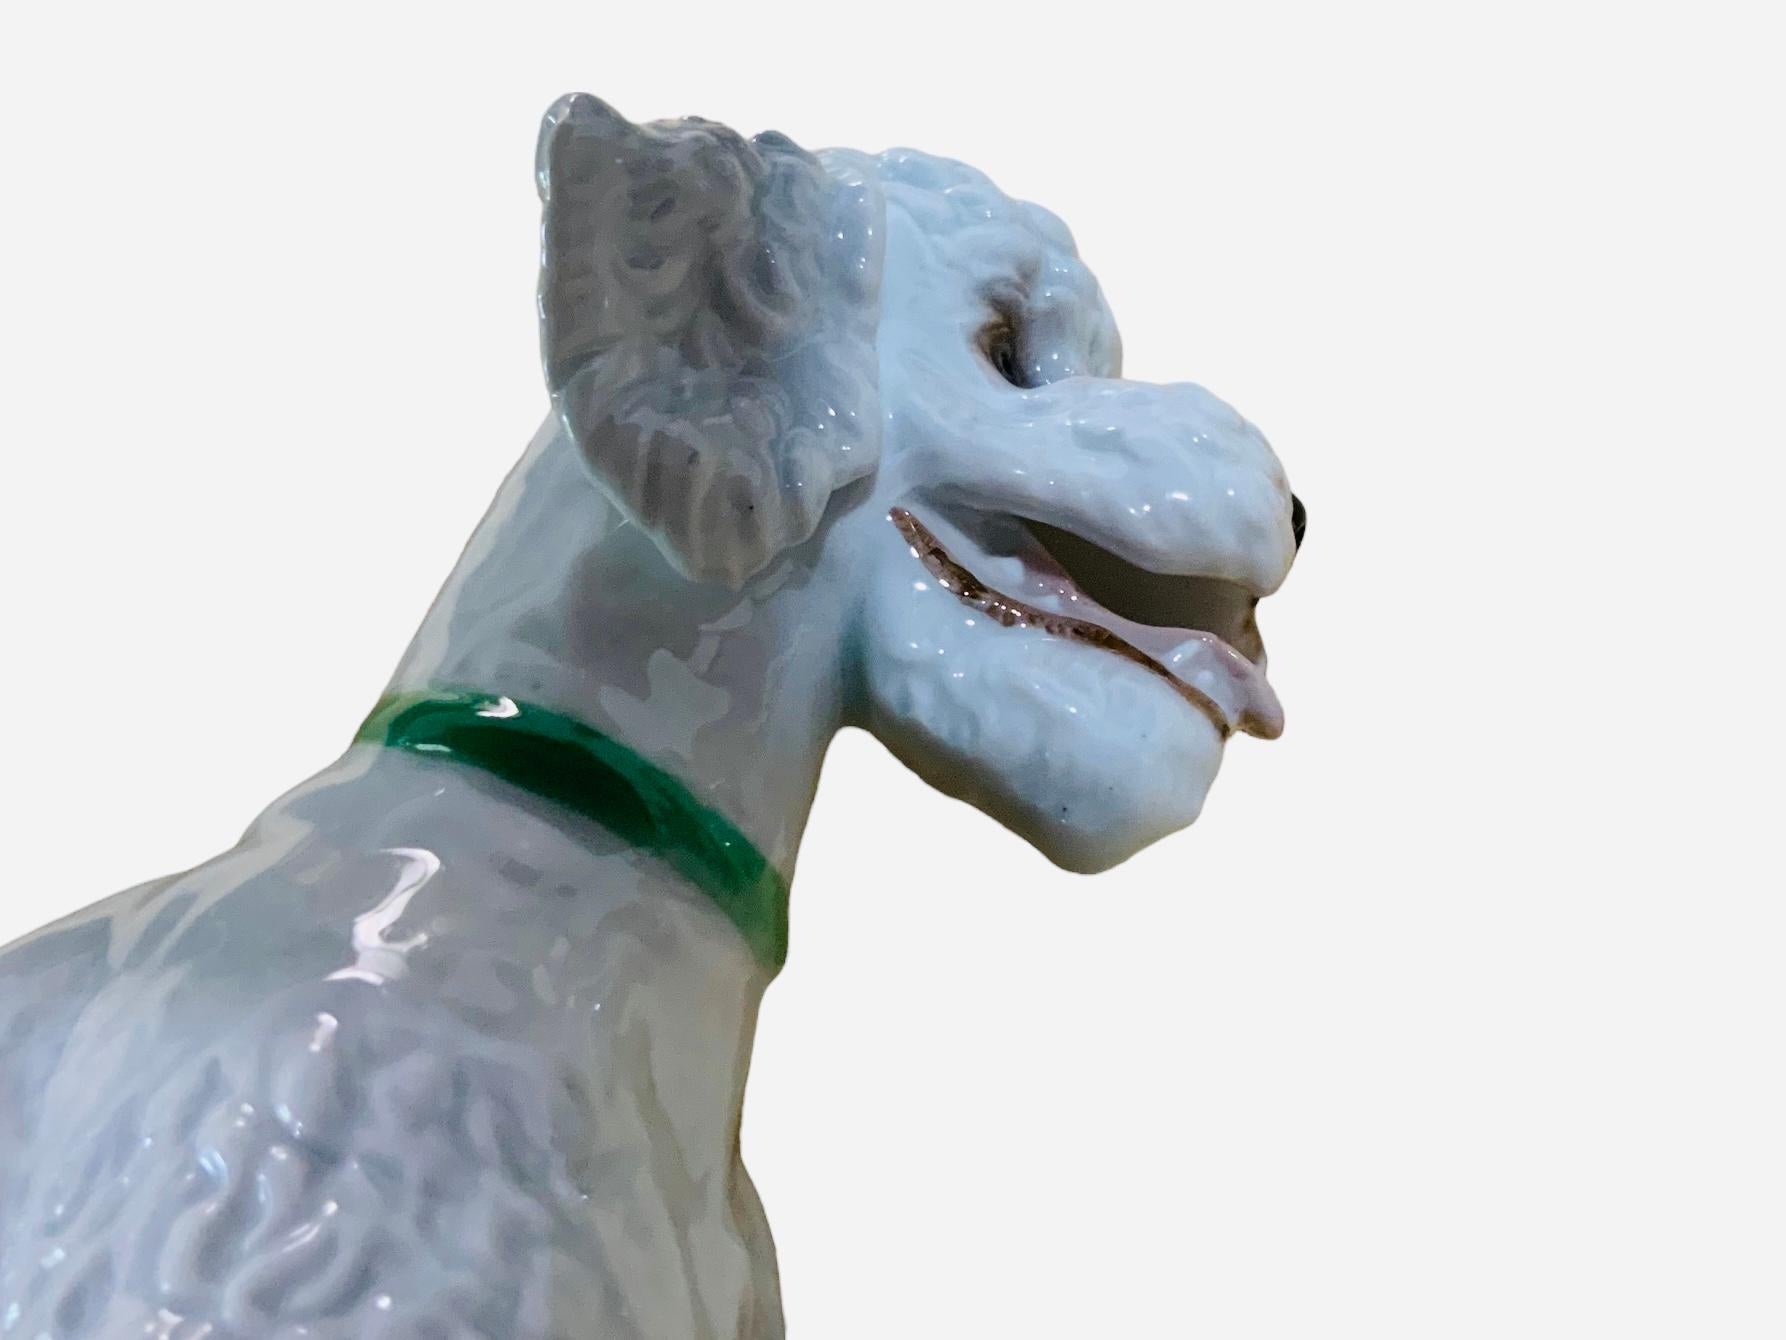 This is a Rosenthal porcelain figurine of a dog. It depicts a hand painted full of details tall poodle standing up with a green belt in his neck. The Rosenthal hallmark is below the figurine.